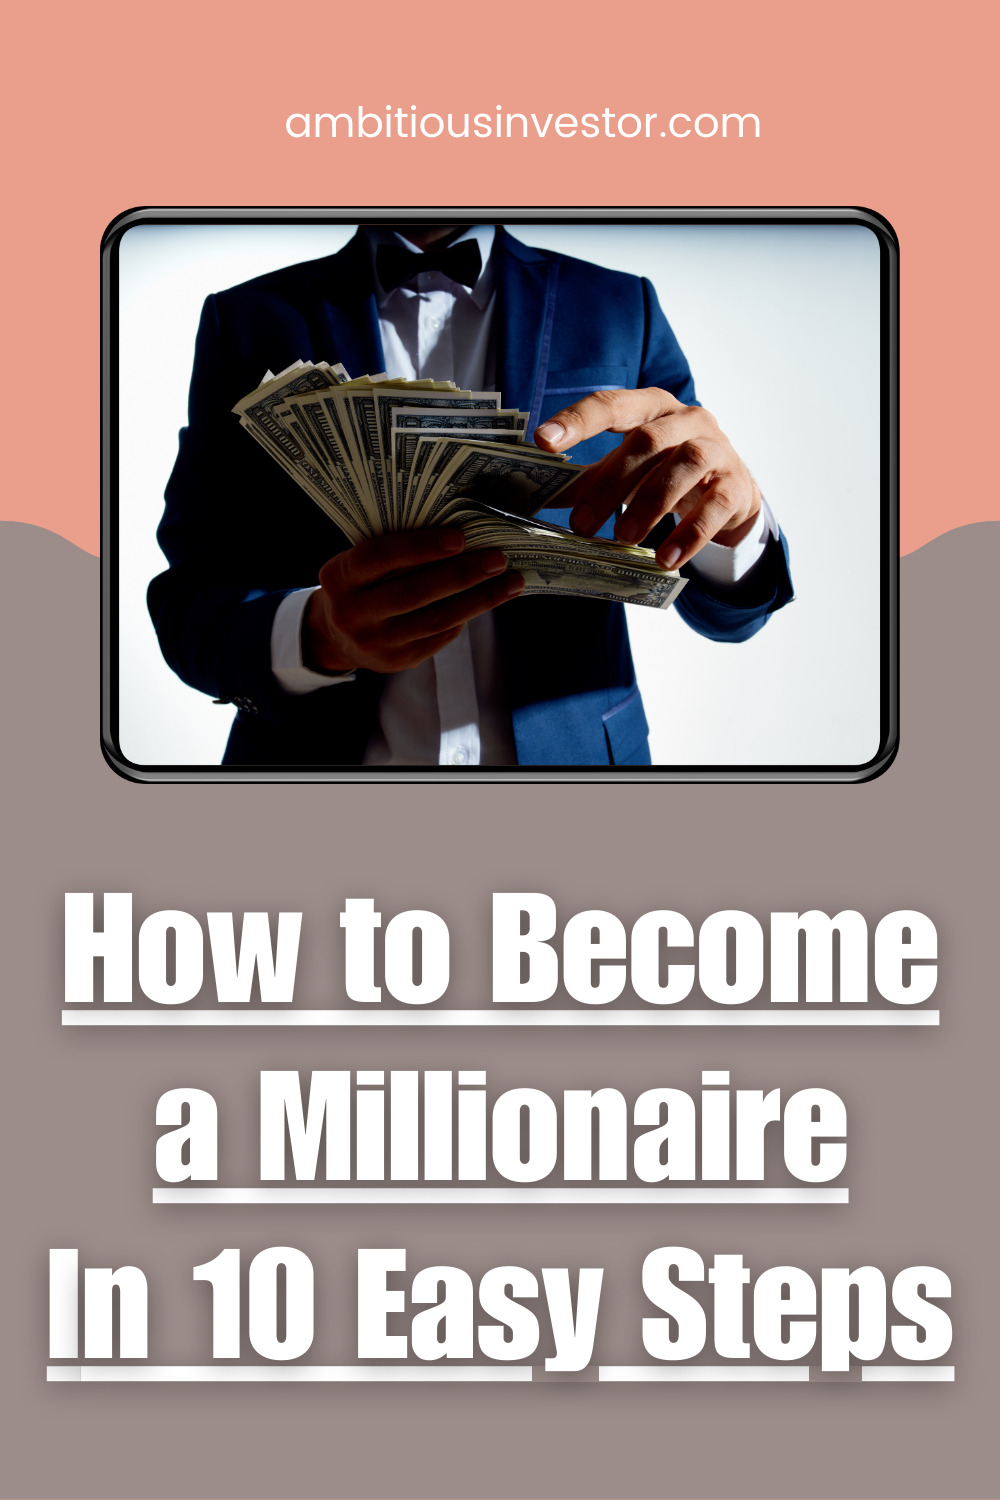 How to Become a Millionaire in 10 Easy Steps
